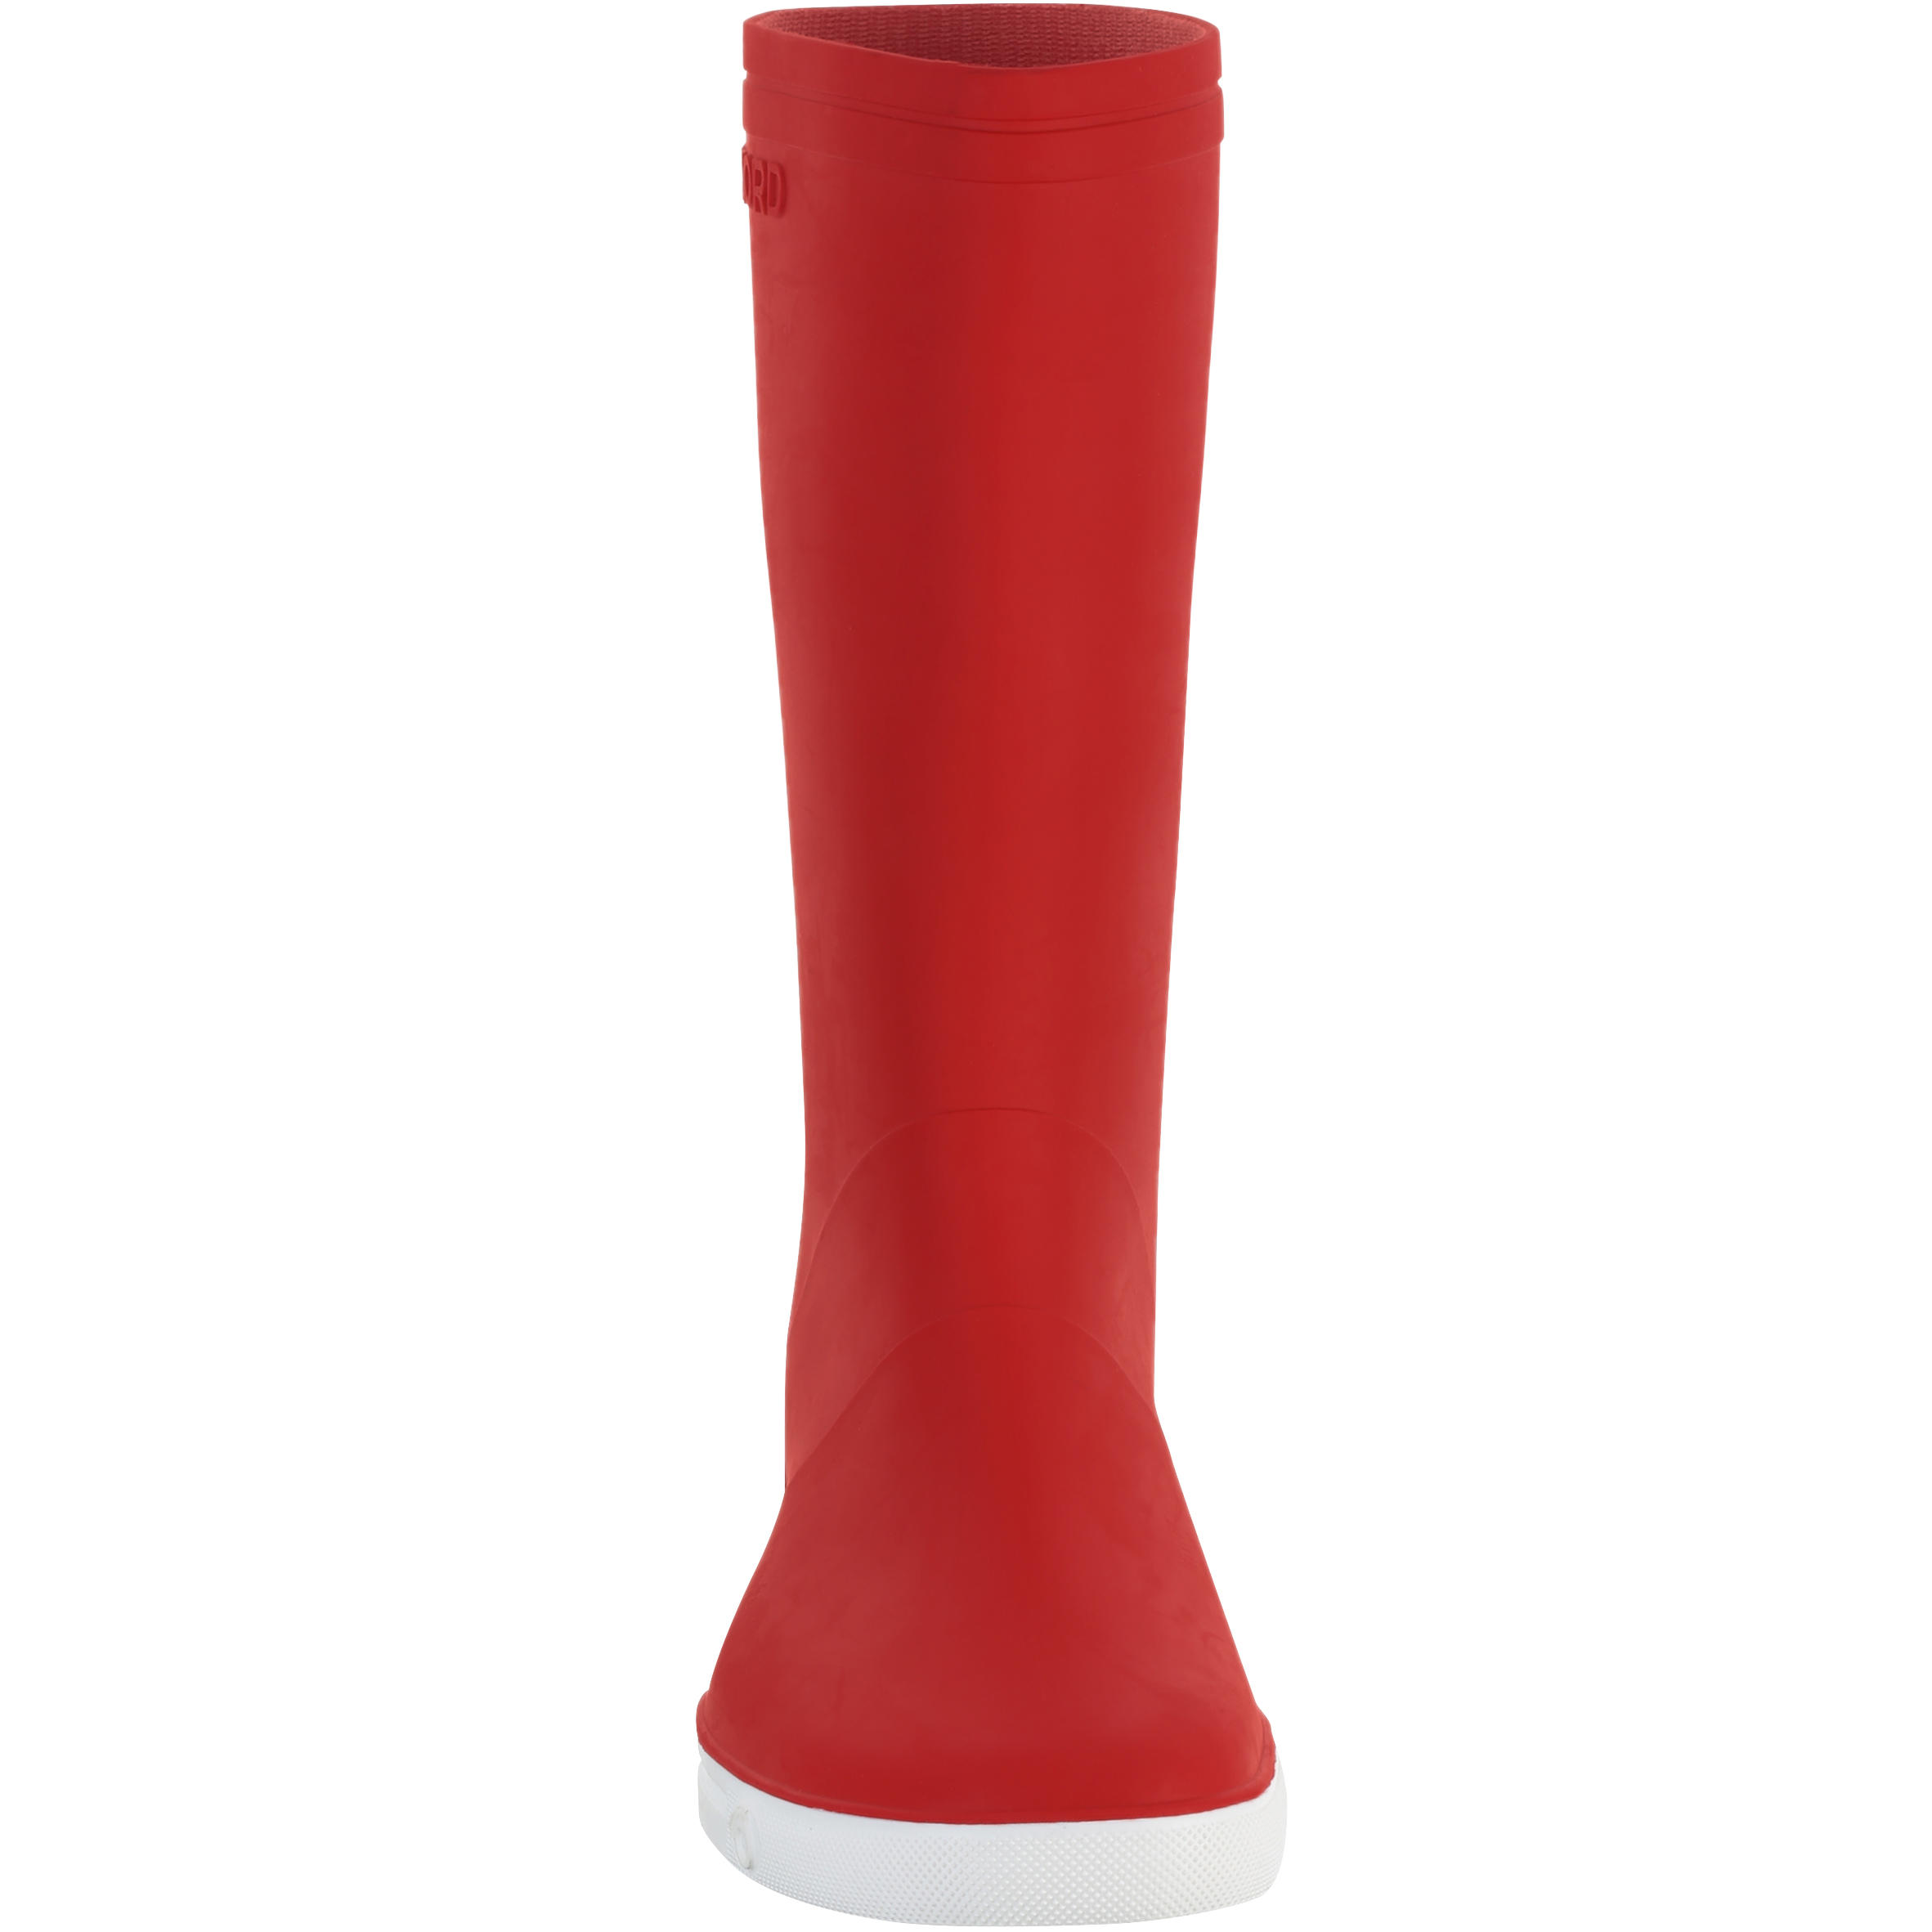 Sailing 100 Adult Wellies  - Red 5/12